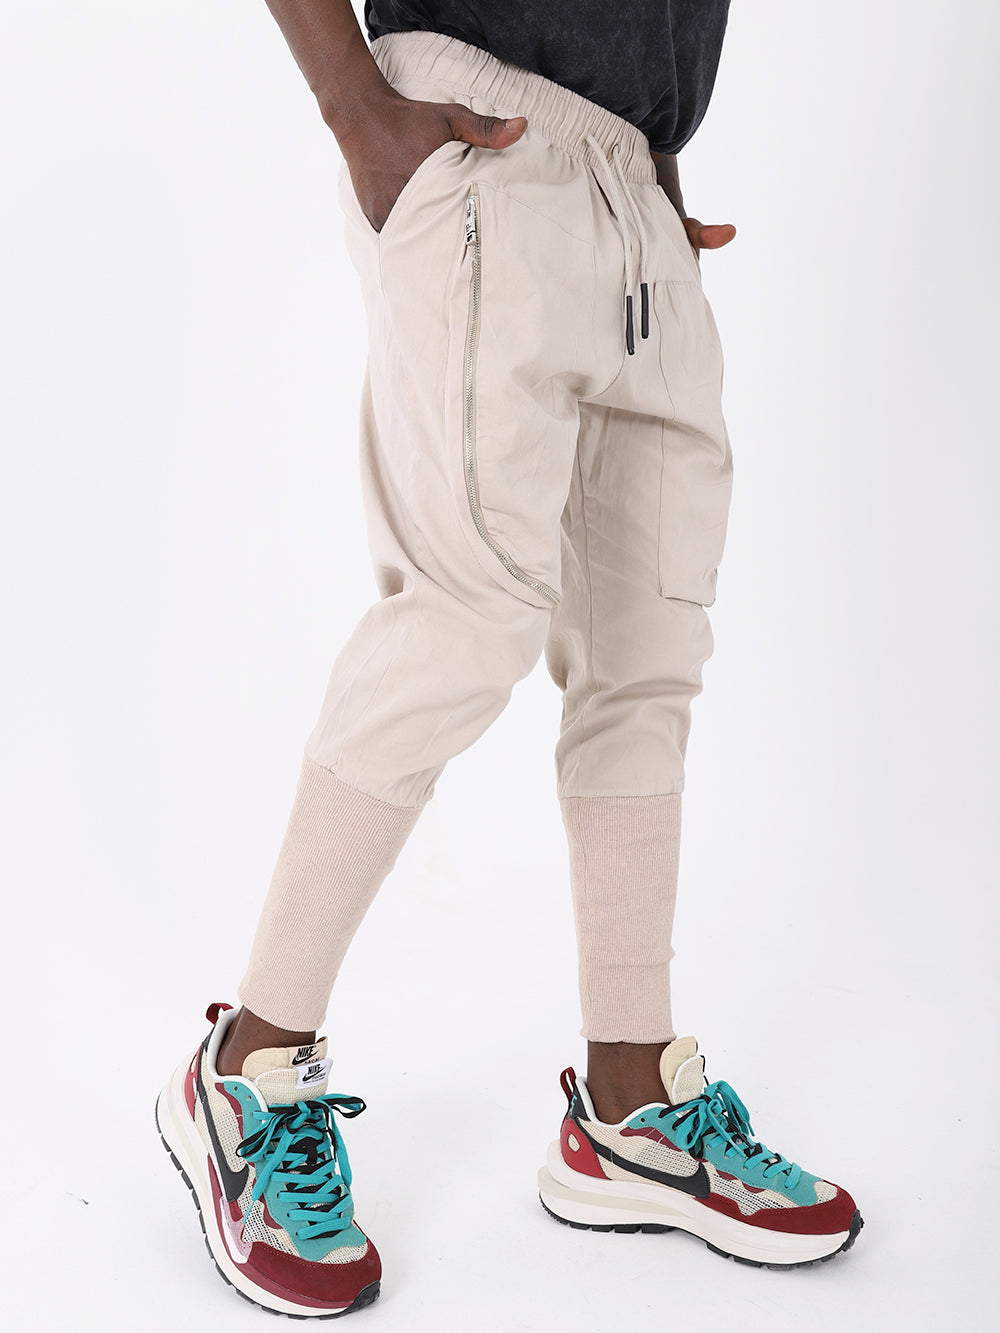 A man wearing ALTIS JOGGERS, a fashion item that features a beige color, adjustable drawstring waist, and paired with sneakers.